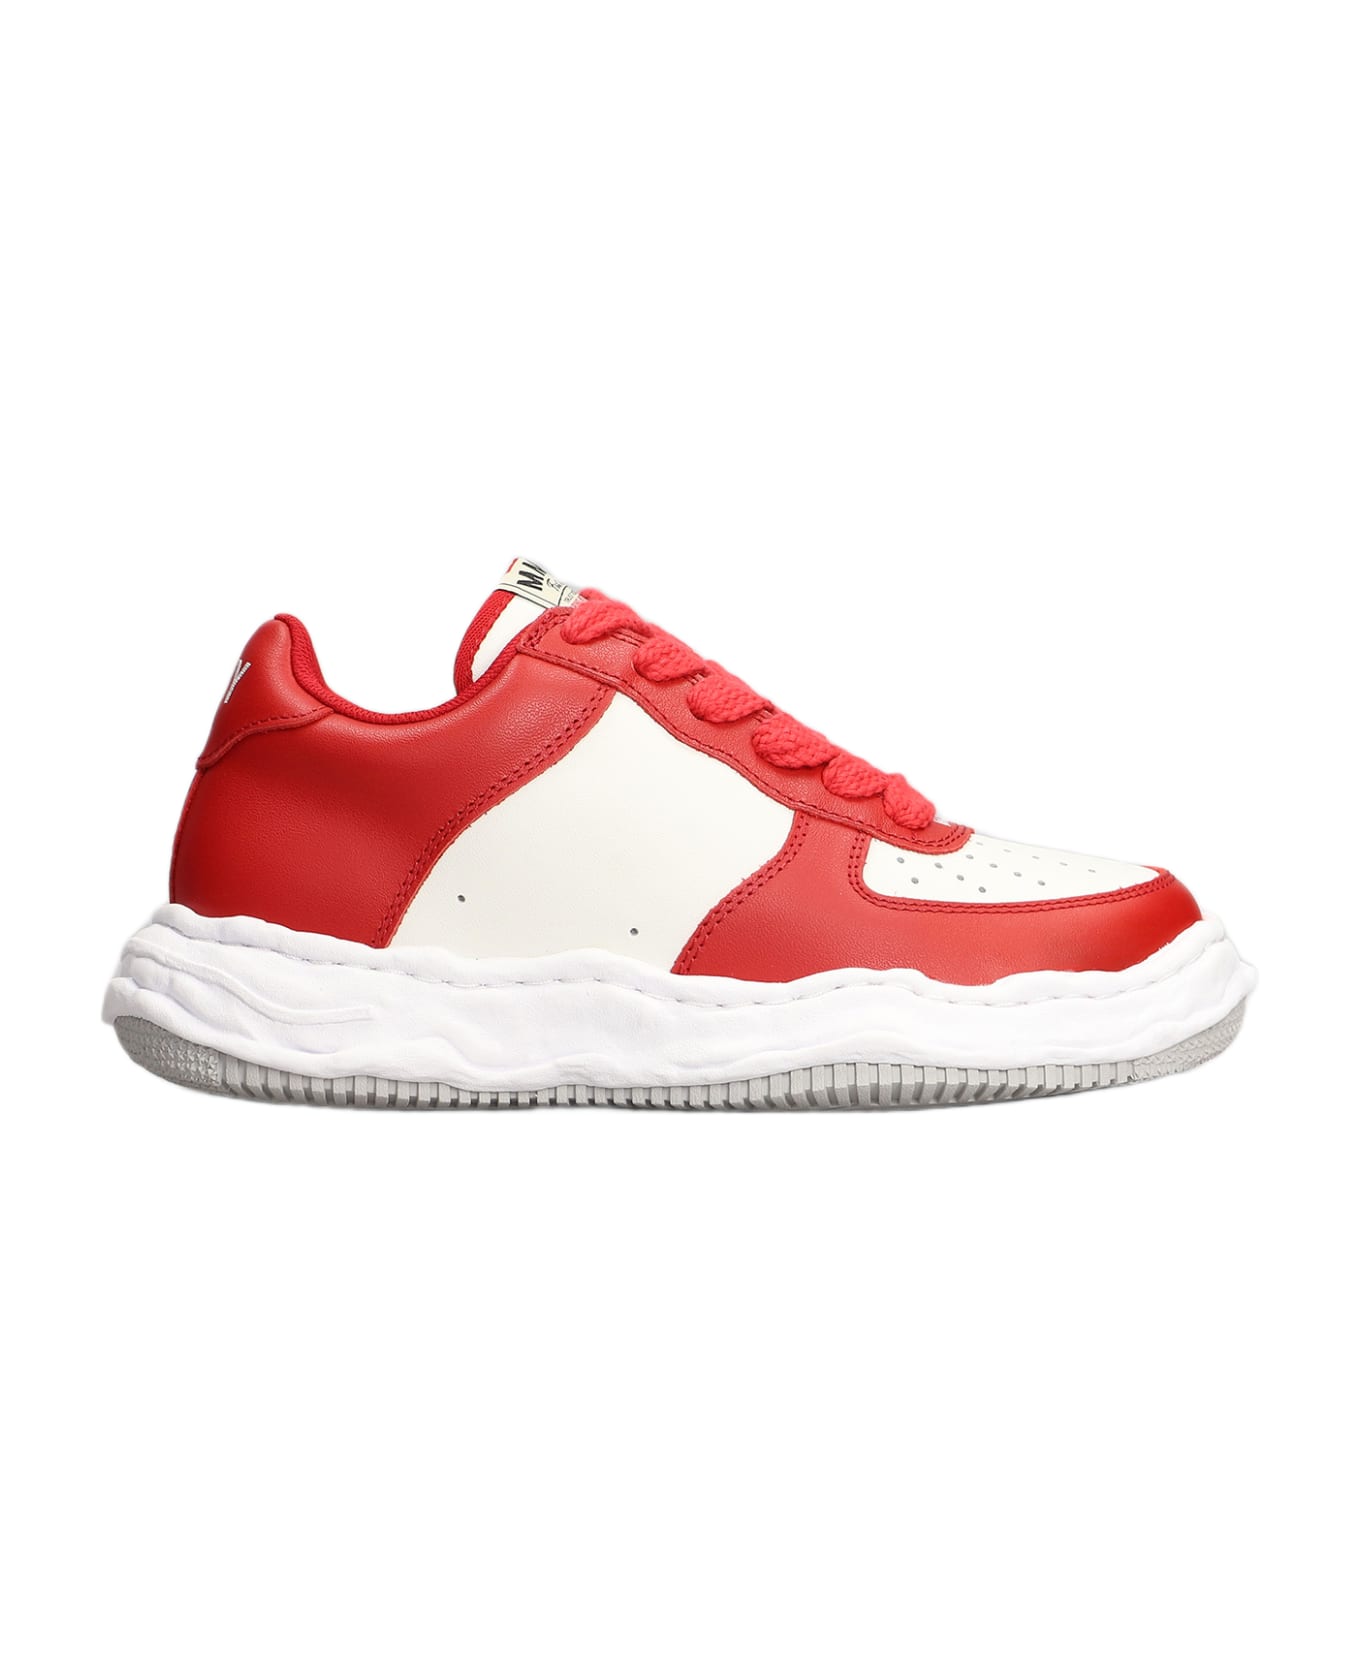 Mihara Yasuhiro Waney Sneakers In Red Leather - red